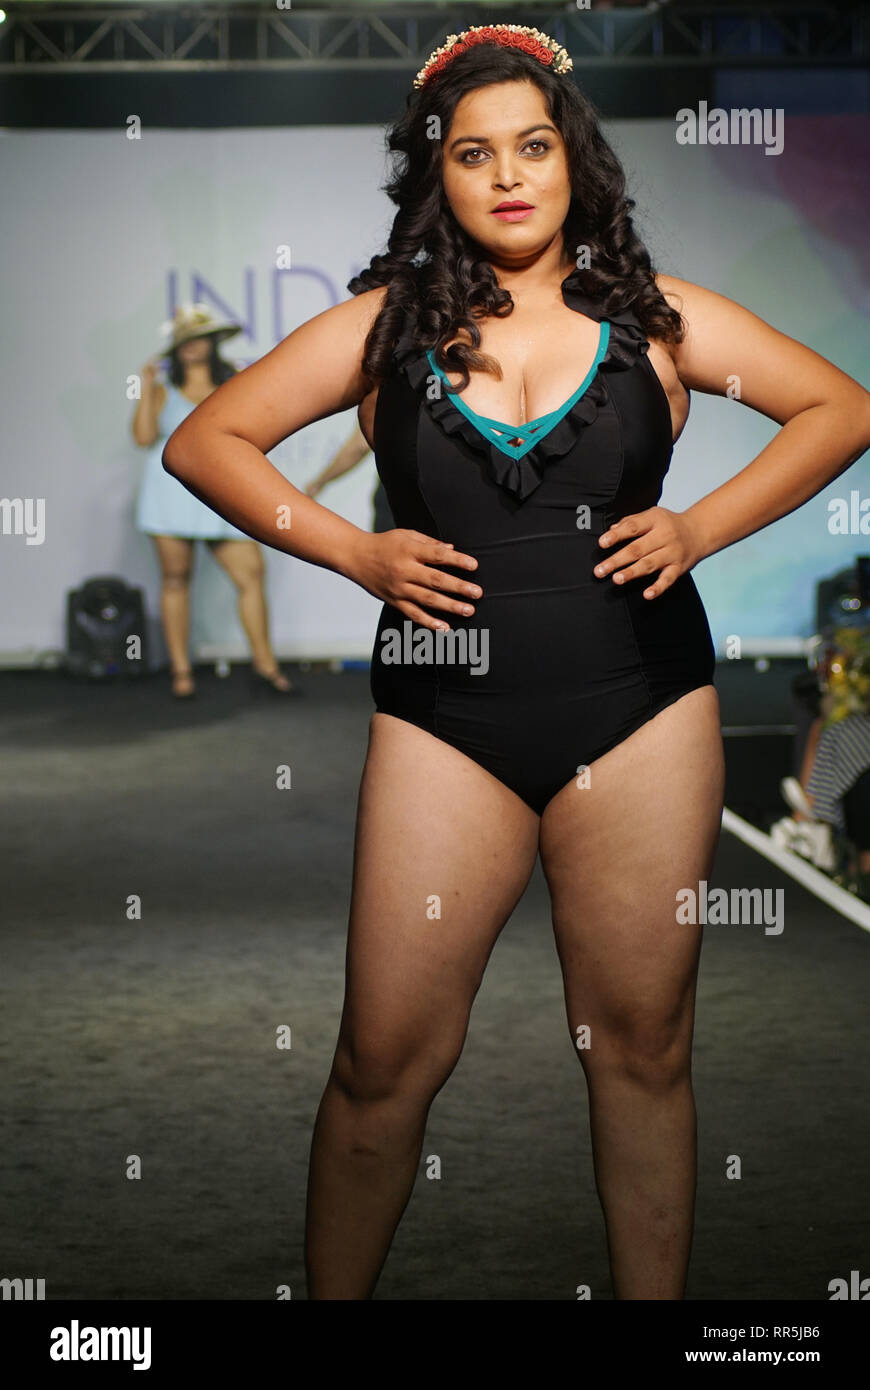 MUMBAI,INDIA, 23RD FEB 2019 PARFAIT Lingerie in association with India Intimate Fashion Week (IIFW) Exclusive Plus Size Fashion Show. Bollywood Act Photo - Alamy